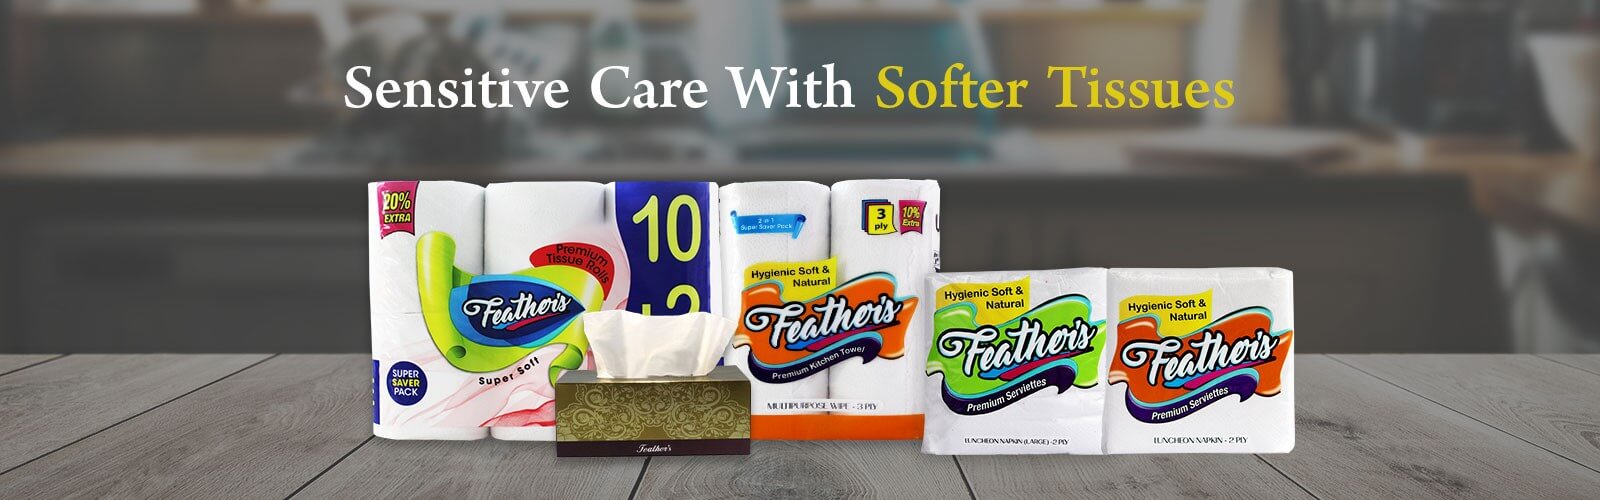 Sensitive Care with Softer Tissues